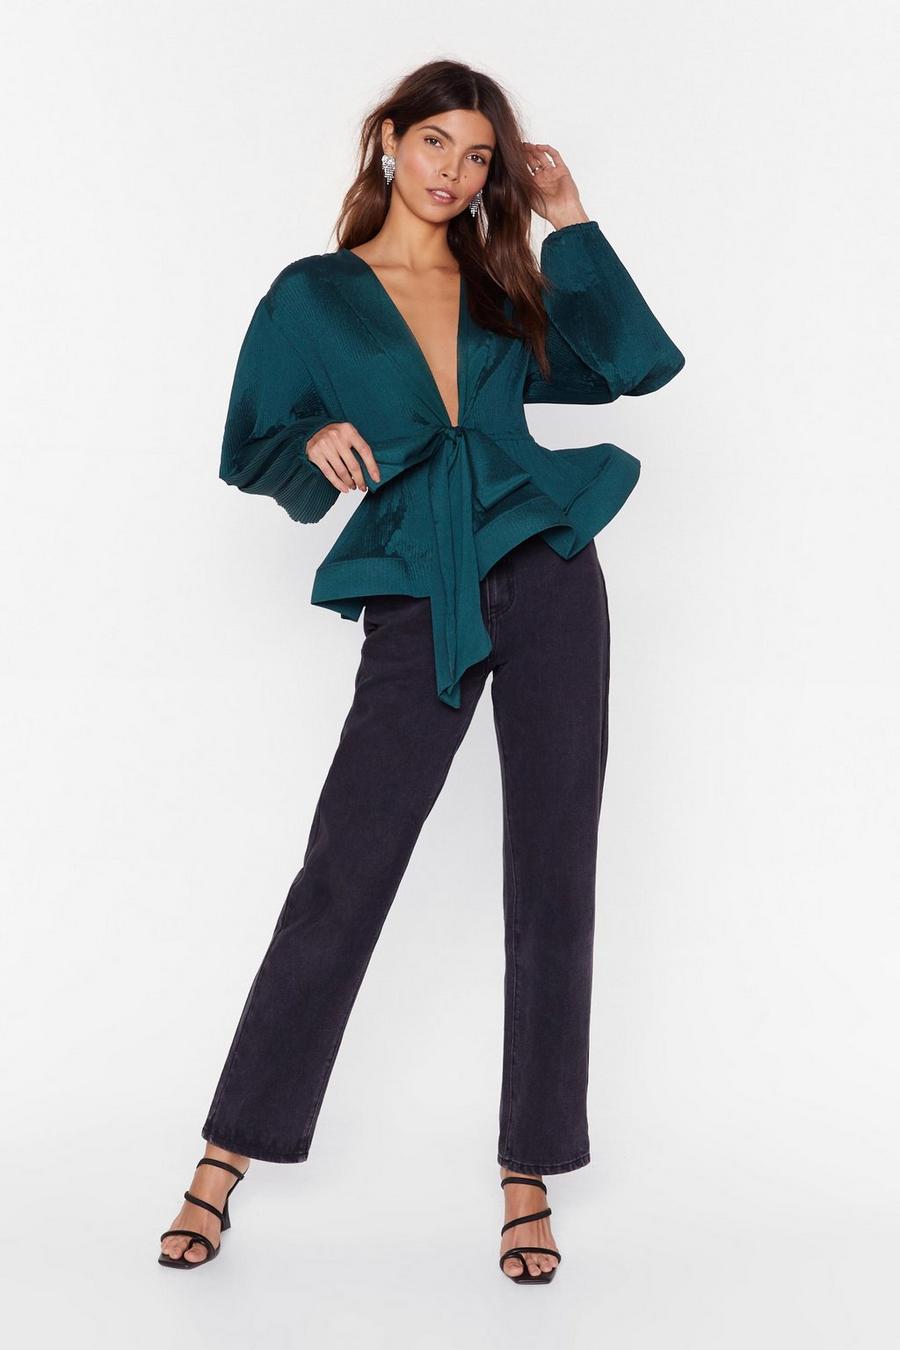 Pleat Don't Call Plunging Tie Blouse